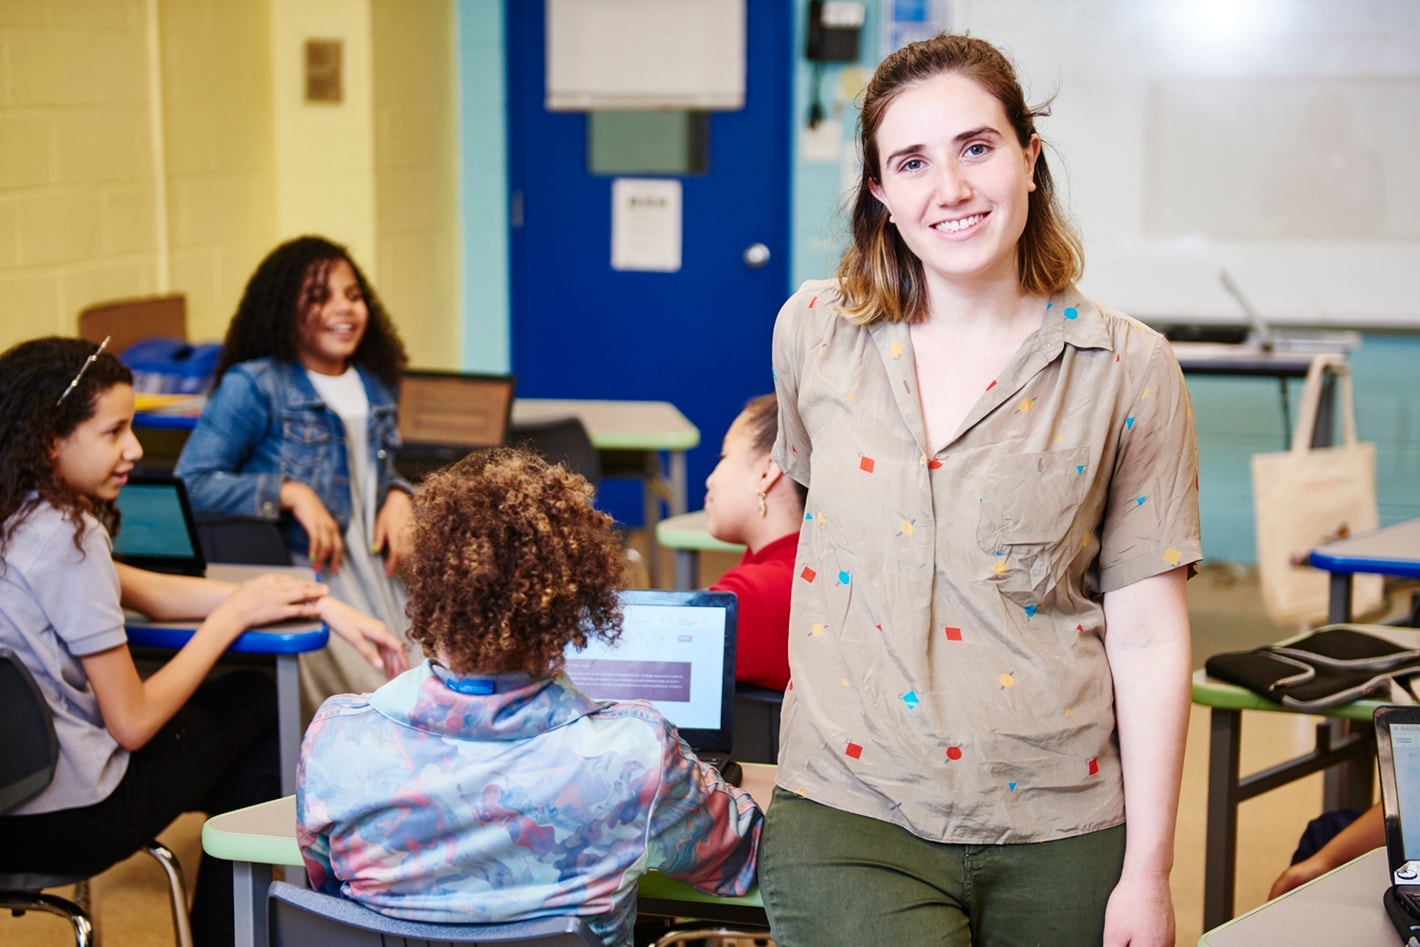 A female teacher smiling at the camera in a classroom with diverse students engaged in background activities.